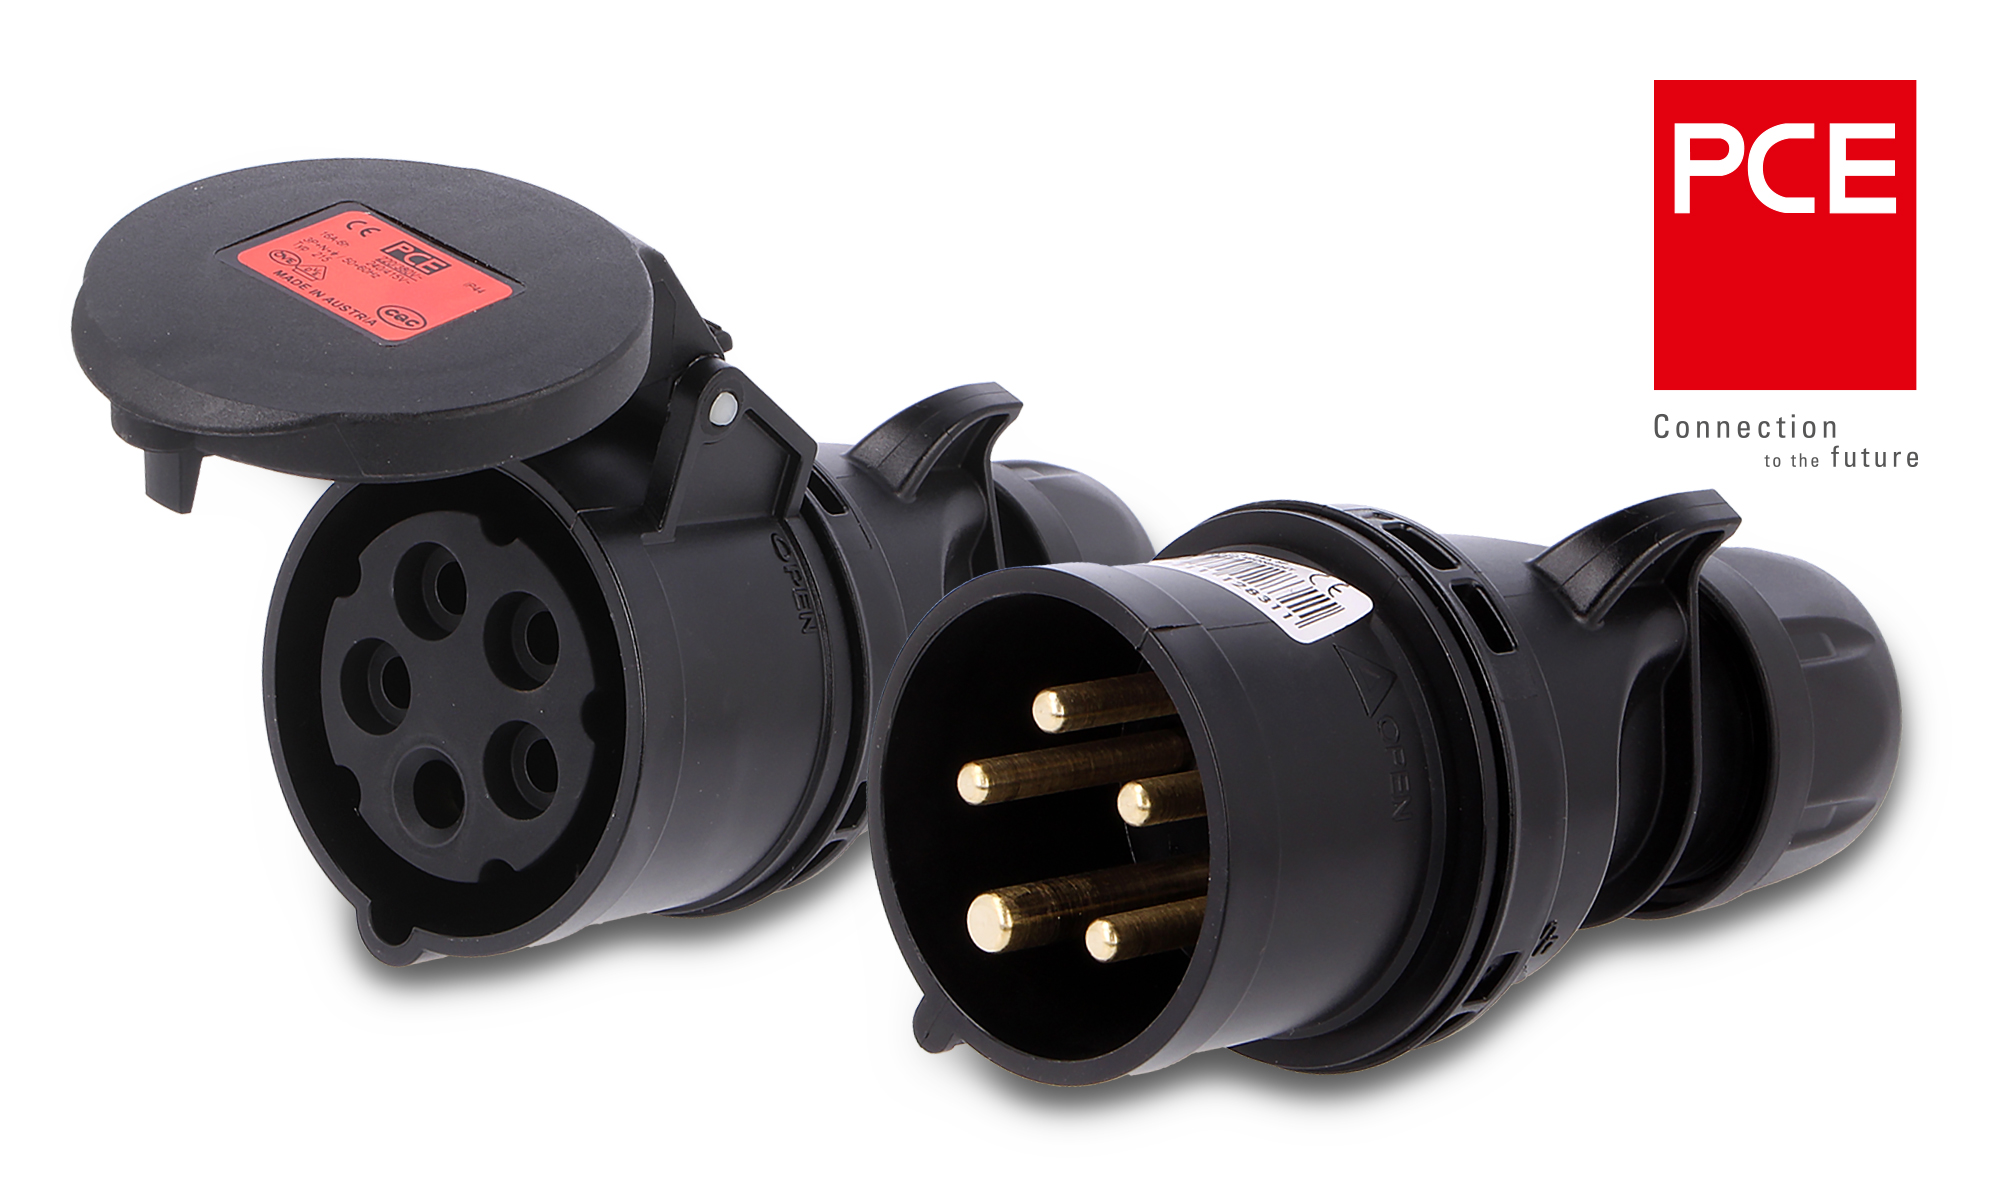 Power connectors from PCE - Midnight series